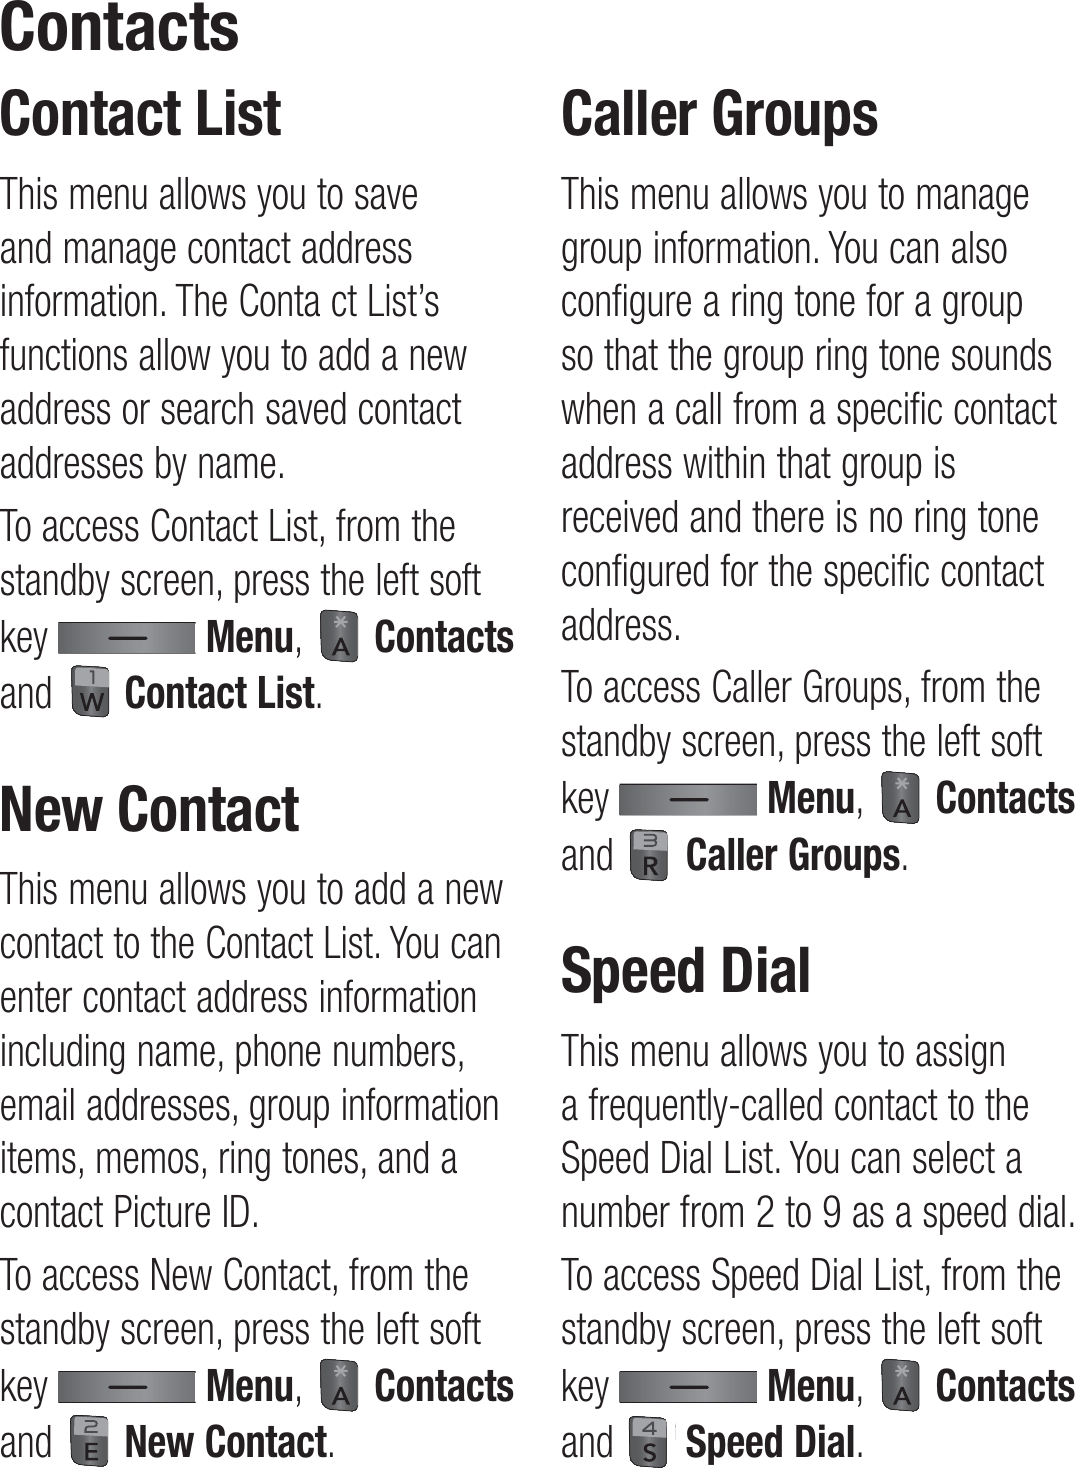 Contact ListThis menu allows you to save and manage contact address information. The Conta ct List’s functions allow you to add a new address or search saved contact addresses by name.To access Contact List, from the standby screen, press the left soft key   Menu,   Contacts and   Contact List.New ContactThis menu allows you to add a new contact to the Contact List. You can enter contact address information including name, phone numbers, email addresses, group information items, memos, ring tones, and a contact Picture ID.To access New Contact, from the standby screen, press the left soft key   Menu,   Contacts and   New Contact.Caller GroupsThis menu allows you to manage group information. You can also configure a ring tone for a group so that the group ring tone sounds when a call from a specific contact address within that group is received and there is no ring tone configured for the specific contact address.To access Caller Groups, from the standby screen, press the left soft key   Menu,   Contacts and   Caller Groups.Speed DialThis menu allows you to assign a frequently-called contact to the Speed Dial List. You can select a number from 2 to 9 as a speed dial.To access Speed Dial List, from the standby screen, press the left soft key   Menu,   Contacts and   Speed Dial.Contacts